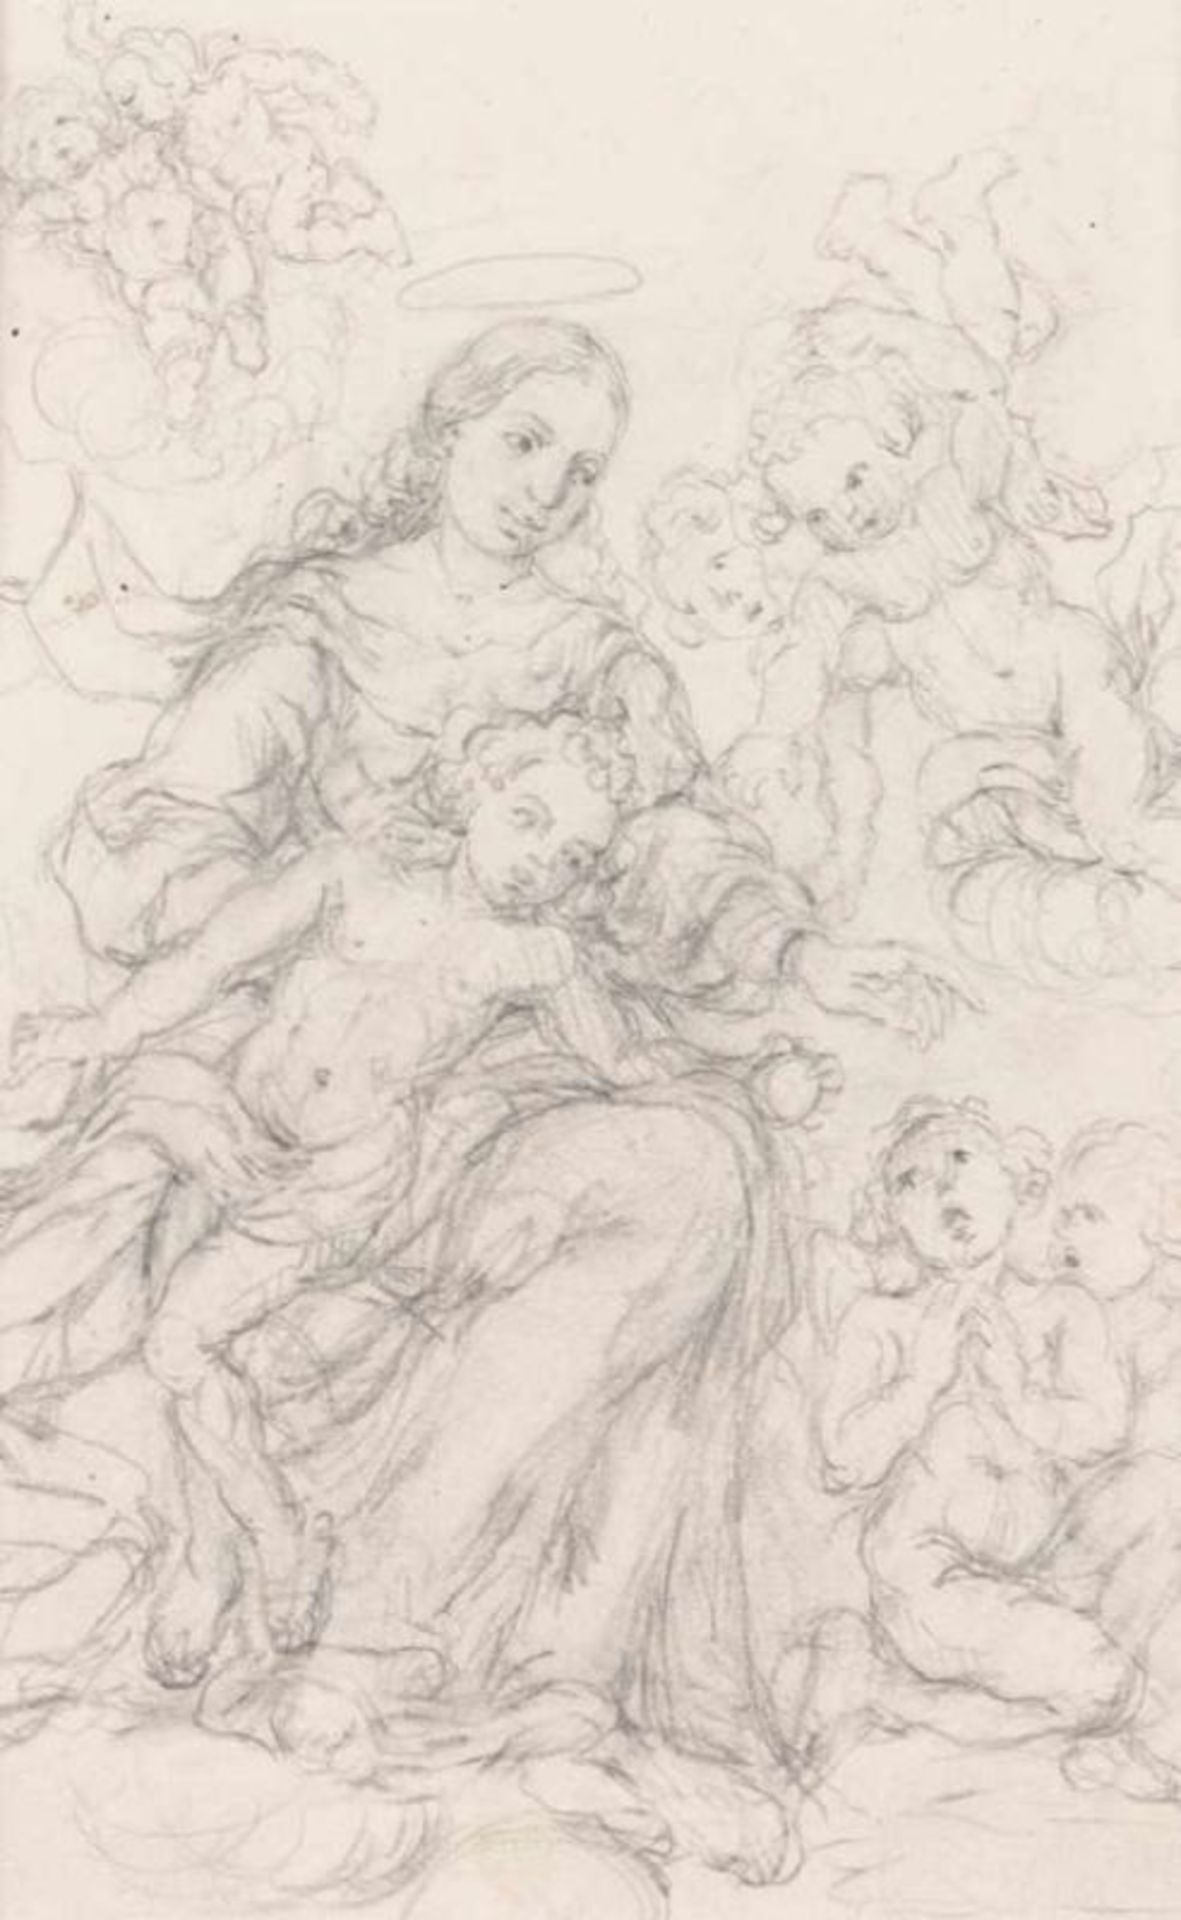 French School of the 18th century Our Lady with Child surrounded by angels Charcoal on paper 20,5x13